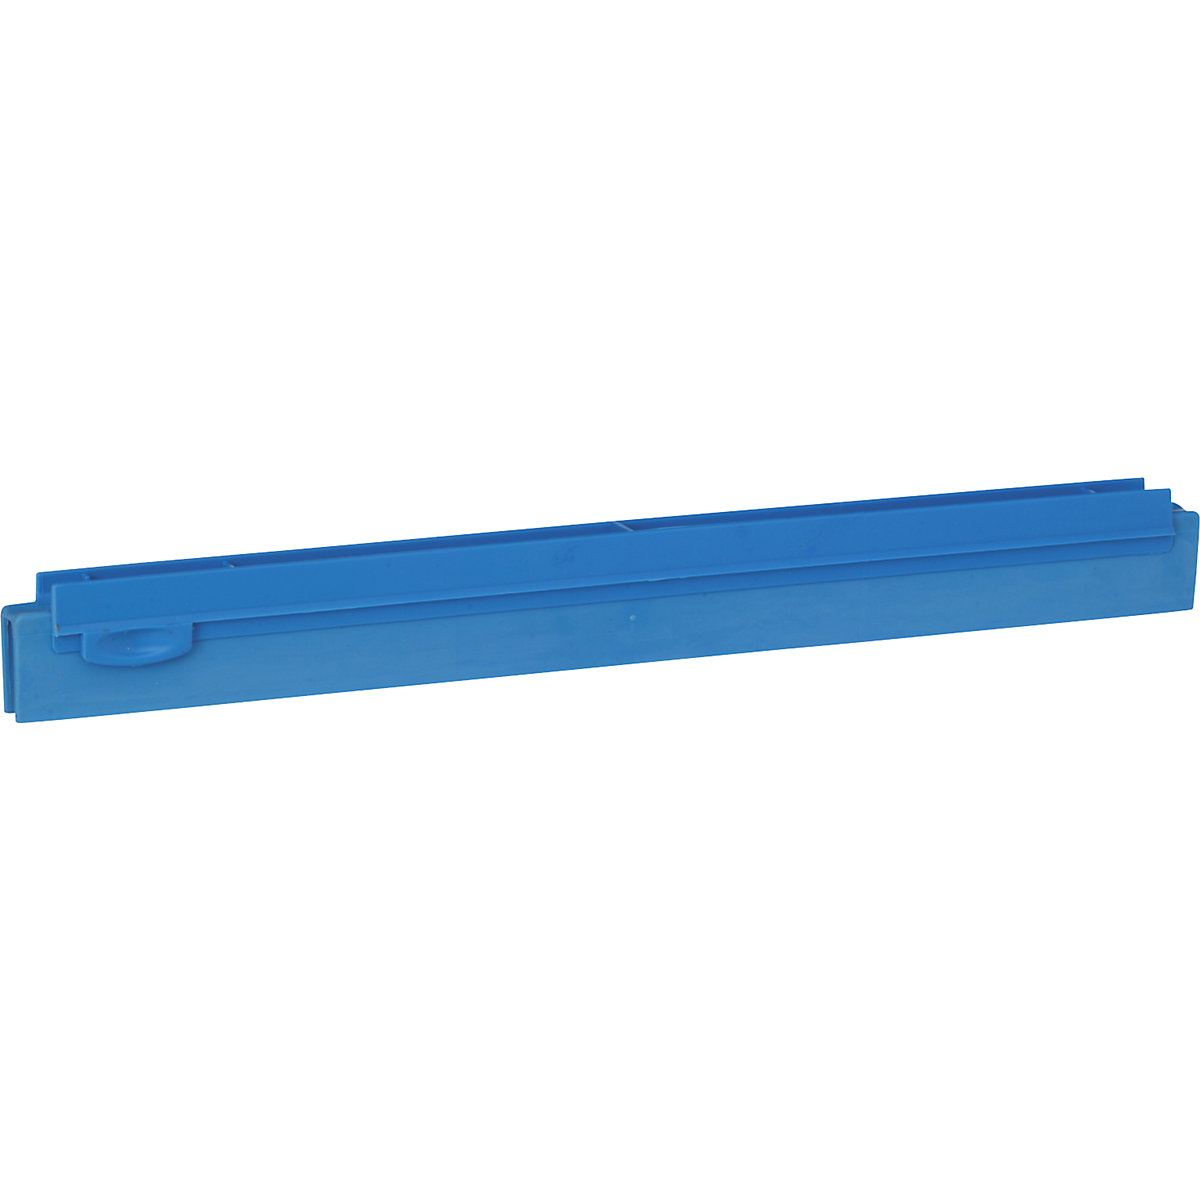 Replacement cartridge, hygienic – Vikan, length 400 mm, pack of 10, blue-2